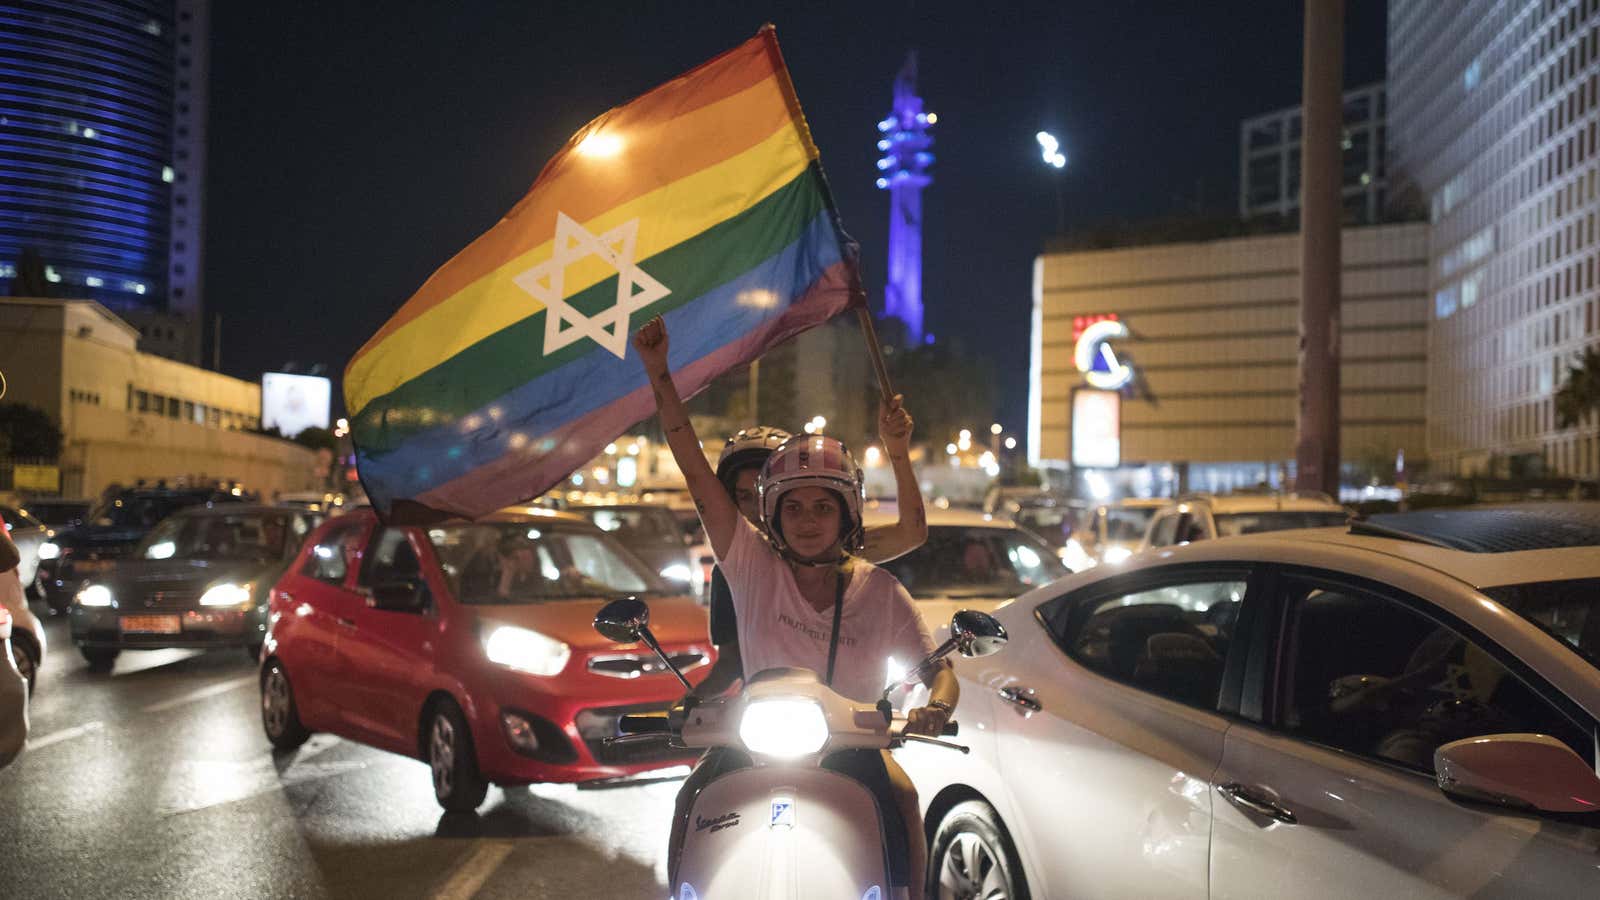 An Israeli woman holds a rainbow flag with a Star of David during a demonstration in Tel Aviv, Thursday, July 20, 2017. Several thousand people are protesting in Tel Aviv against an Israeli government ban on adoptions by same-sex couples. (AP Photo/Dan Balilty)